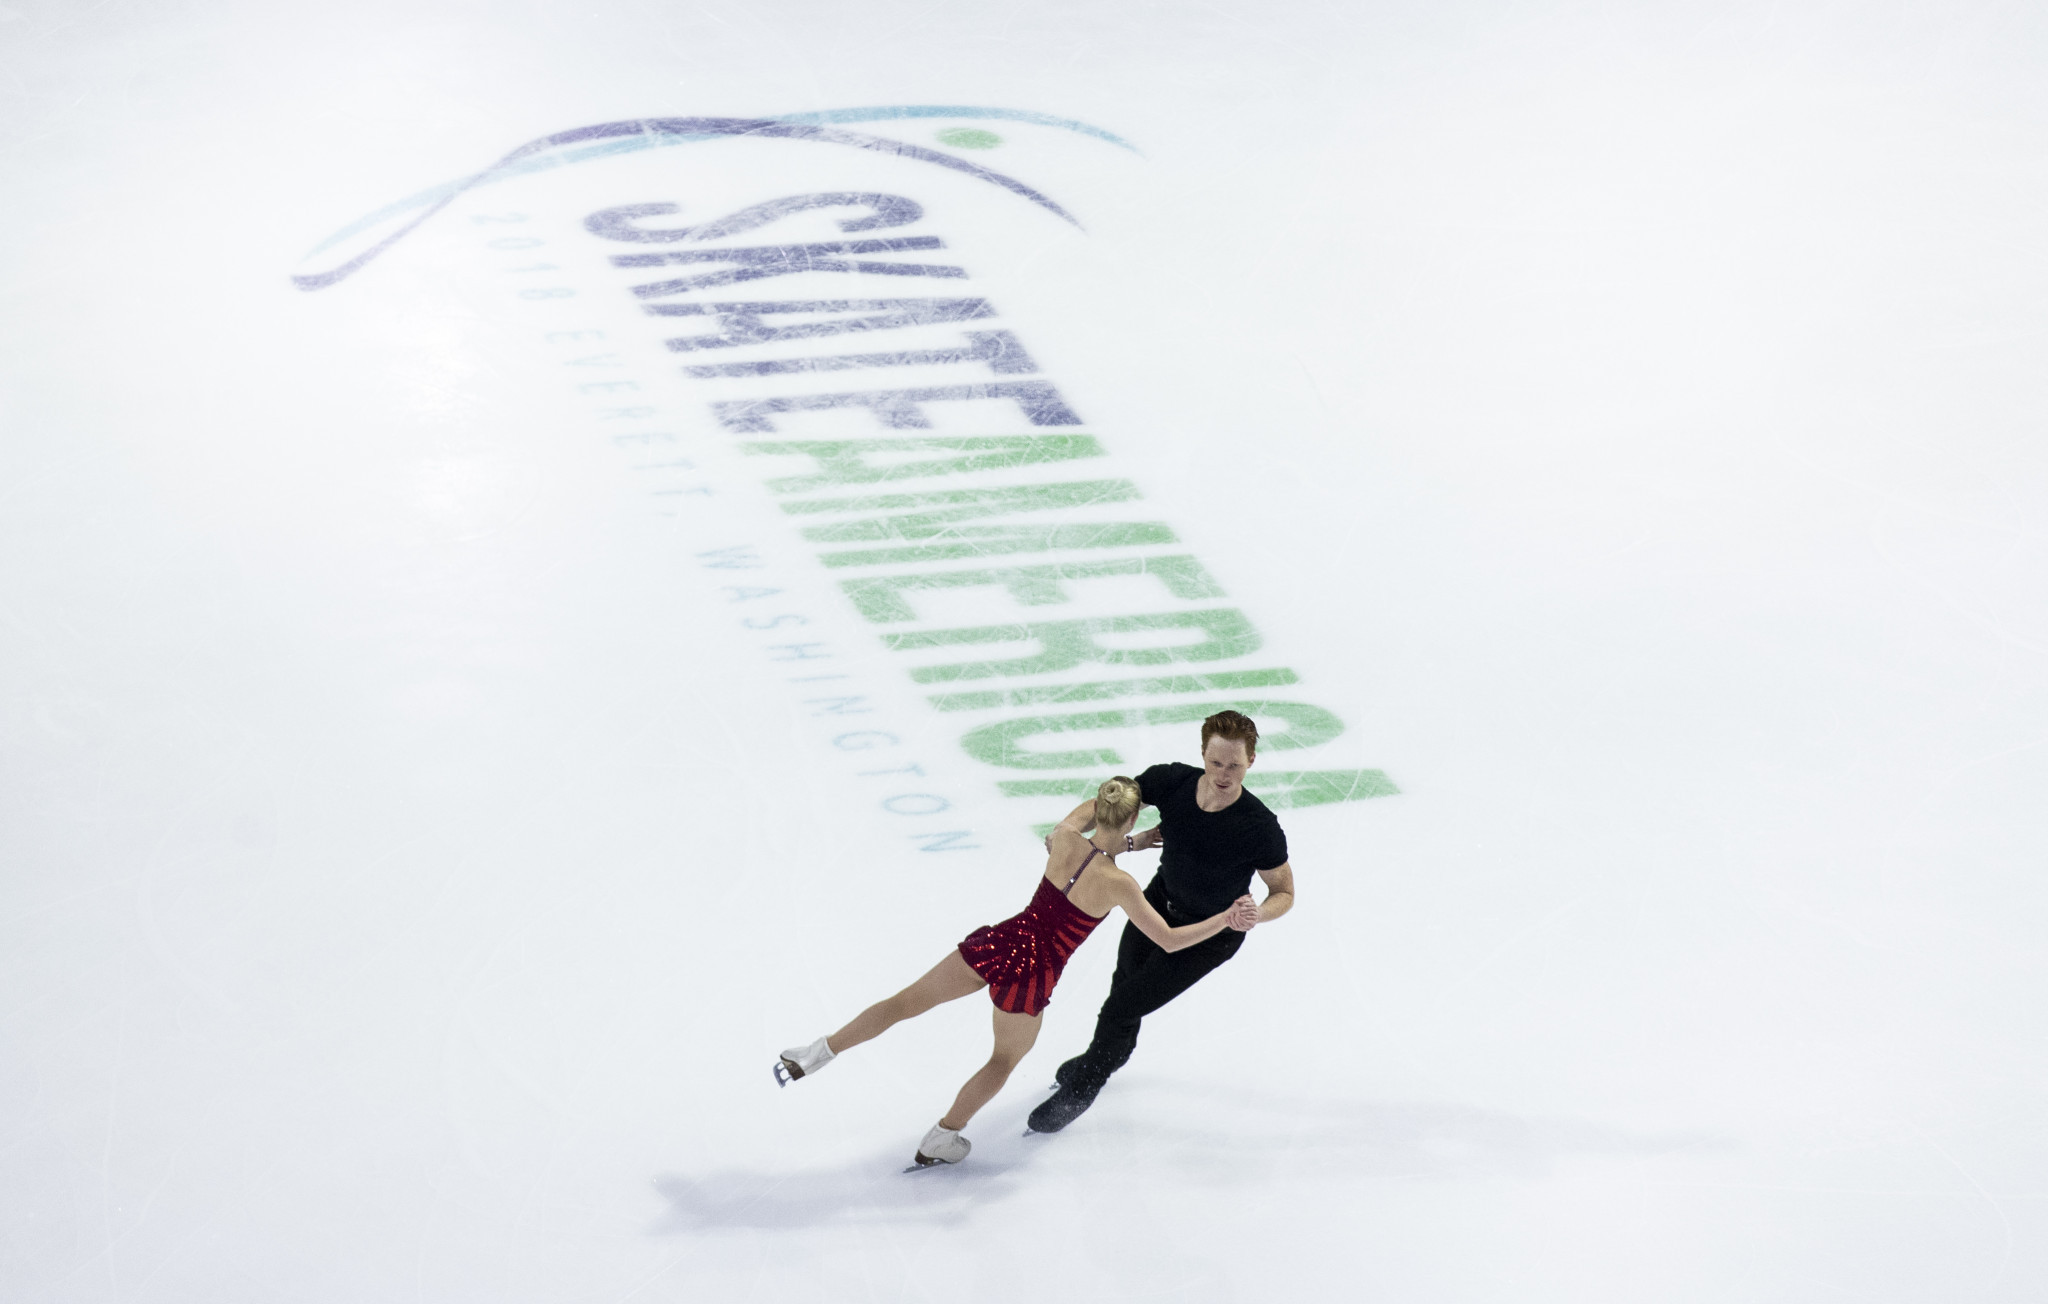 Evgenia Tarasova and Vladimir Morozov lead at the halfway stage of the pairs event ©Getty Images